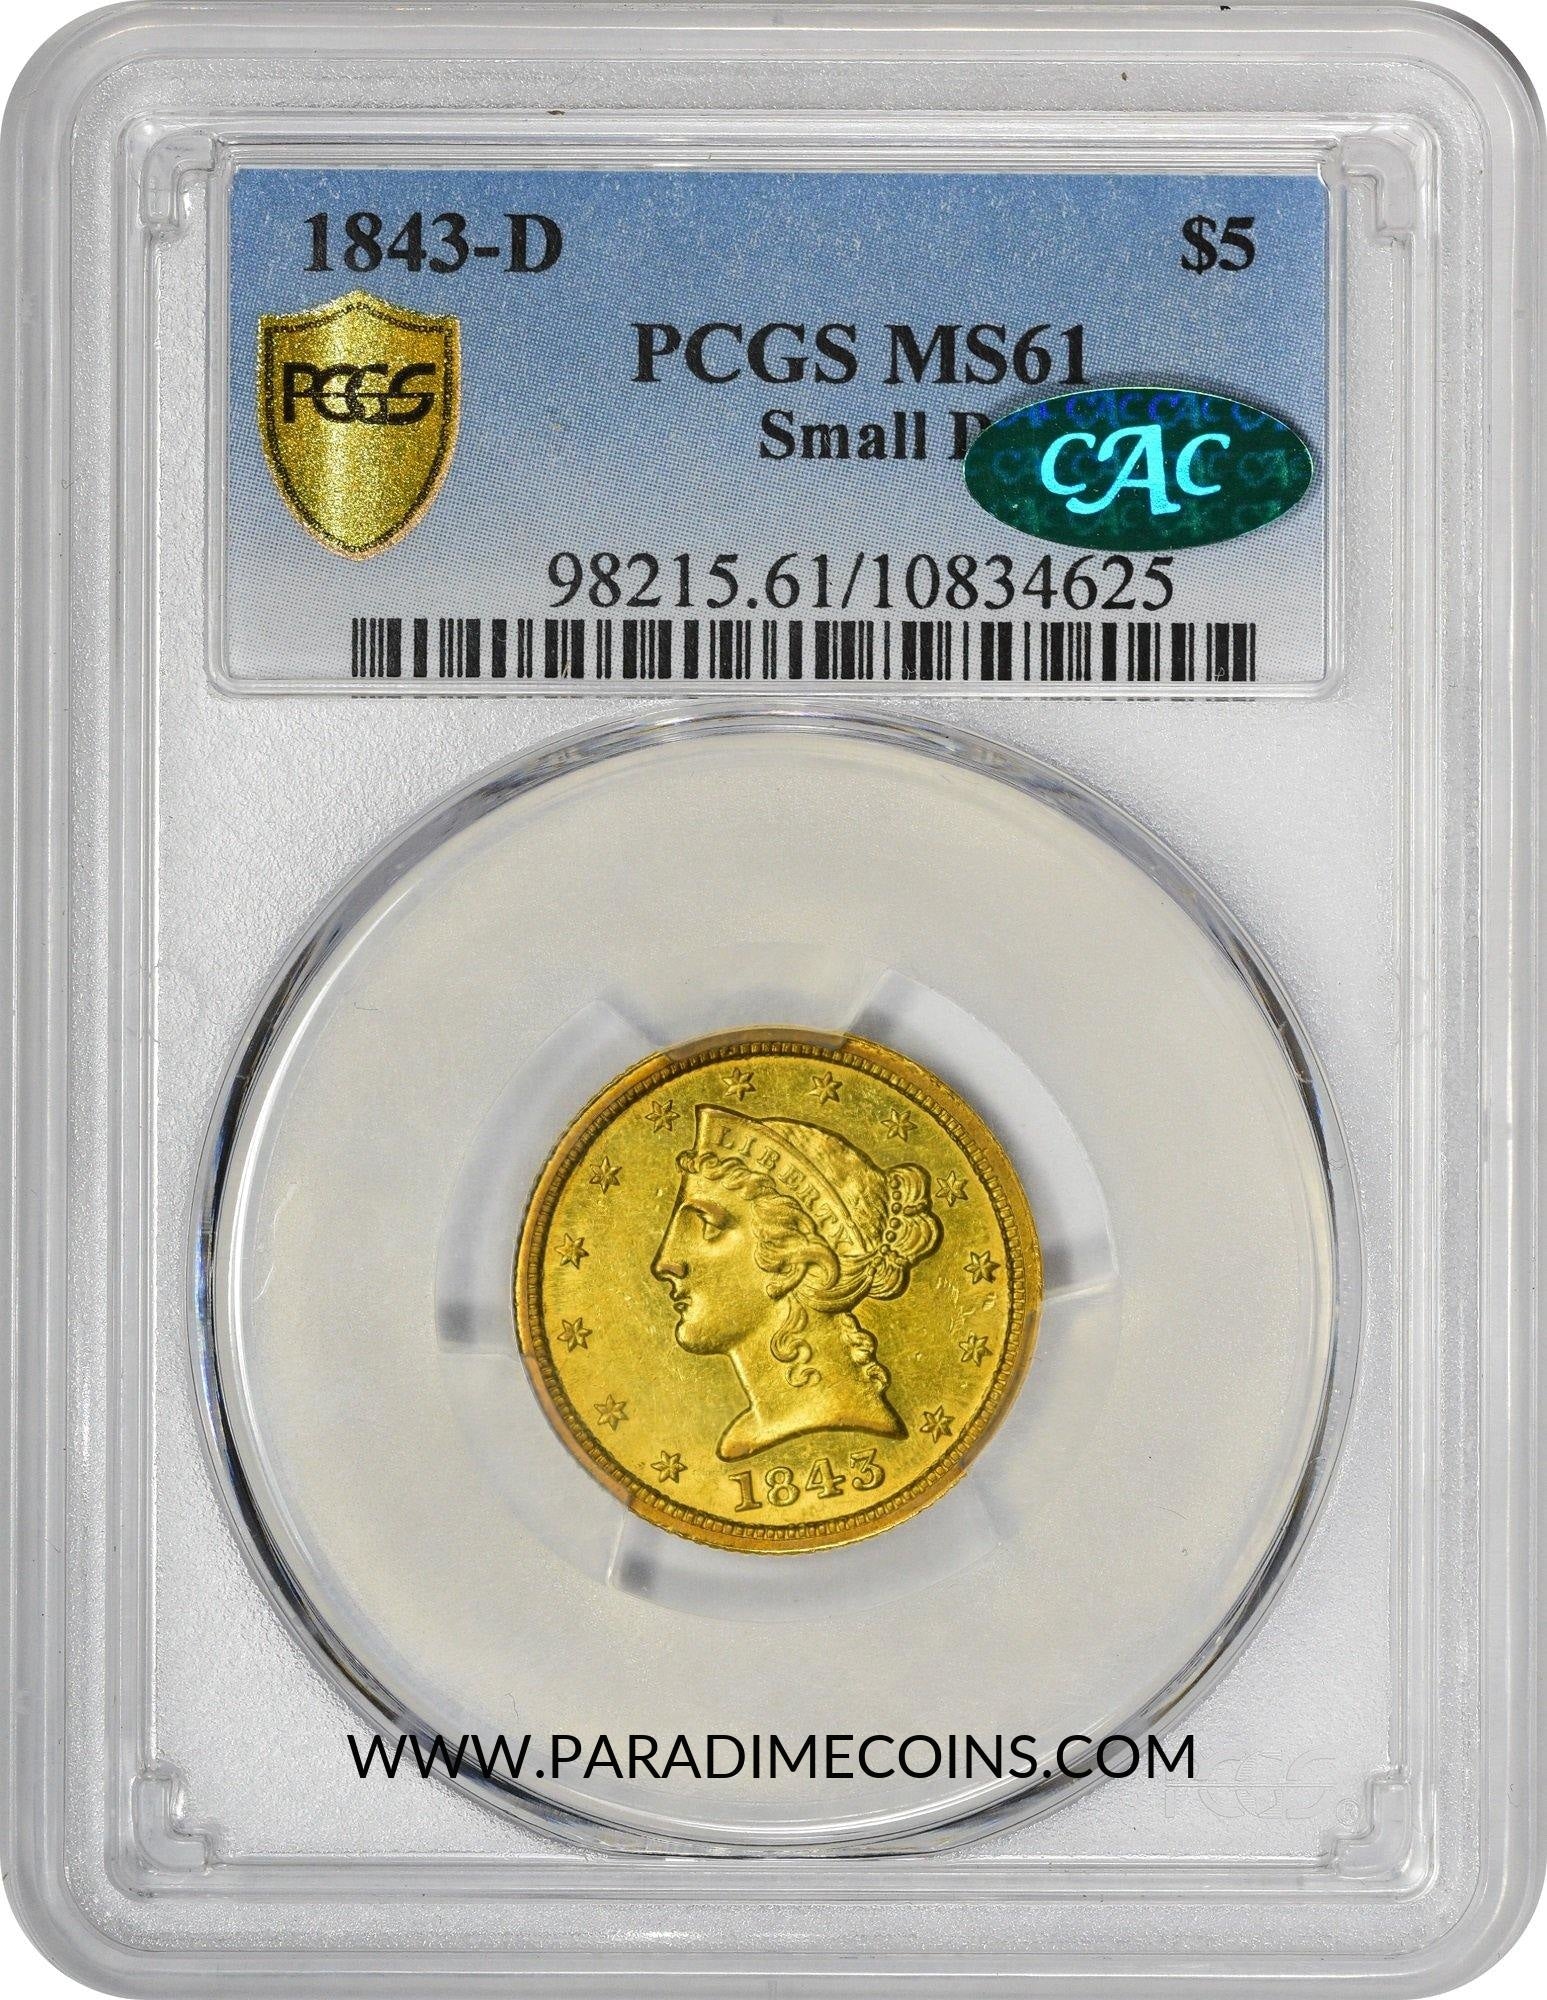 1843-D $5 SMALL D MS61 PCGS CAC - Paradime Coins | PCGS NGC CACG CAC Rare US Numismatic Coins For Sale